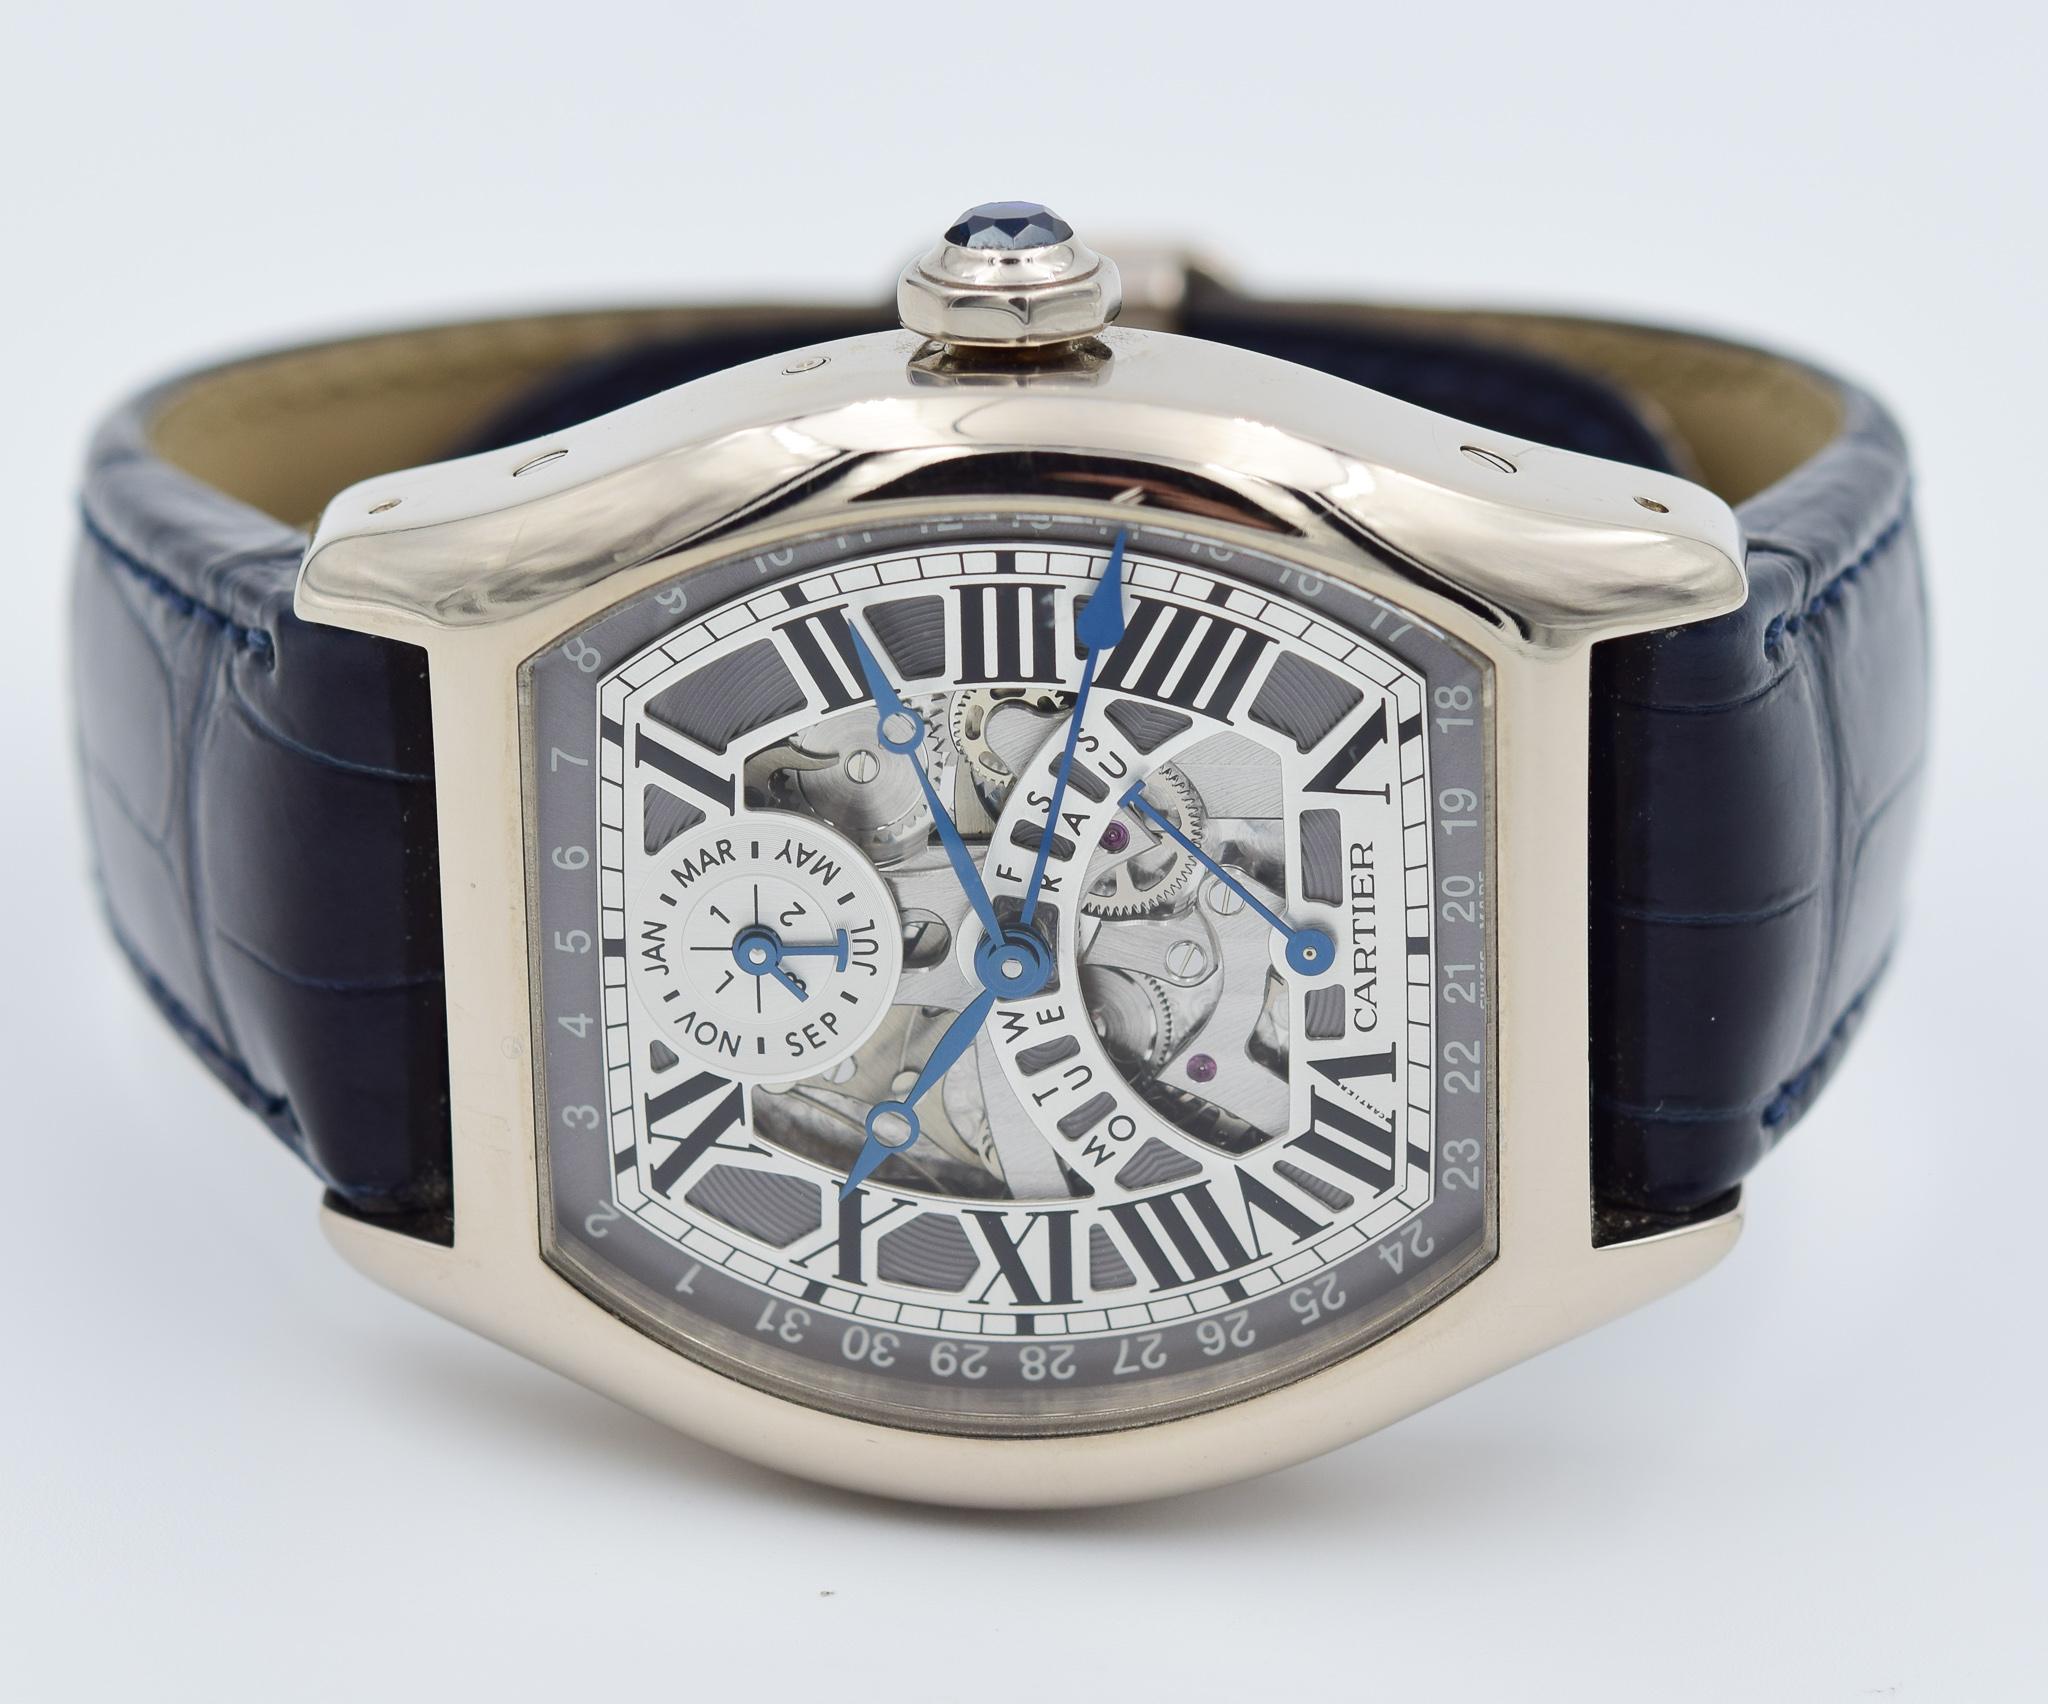 Cartier Tortue Perpetual Calendar in 18k White Gold W1580004, Full Box / Papers 1